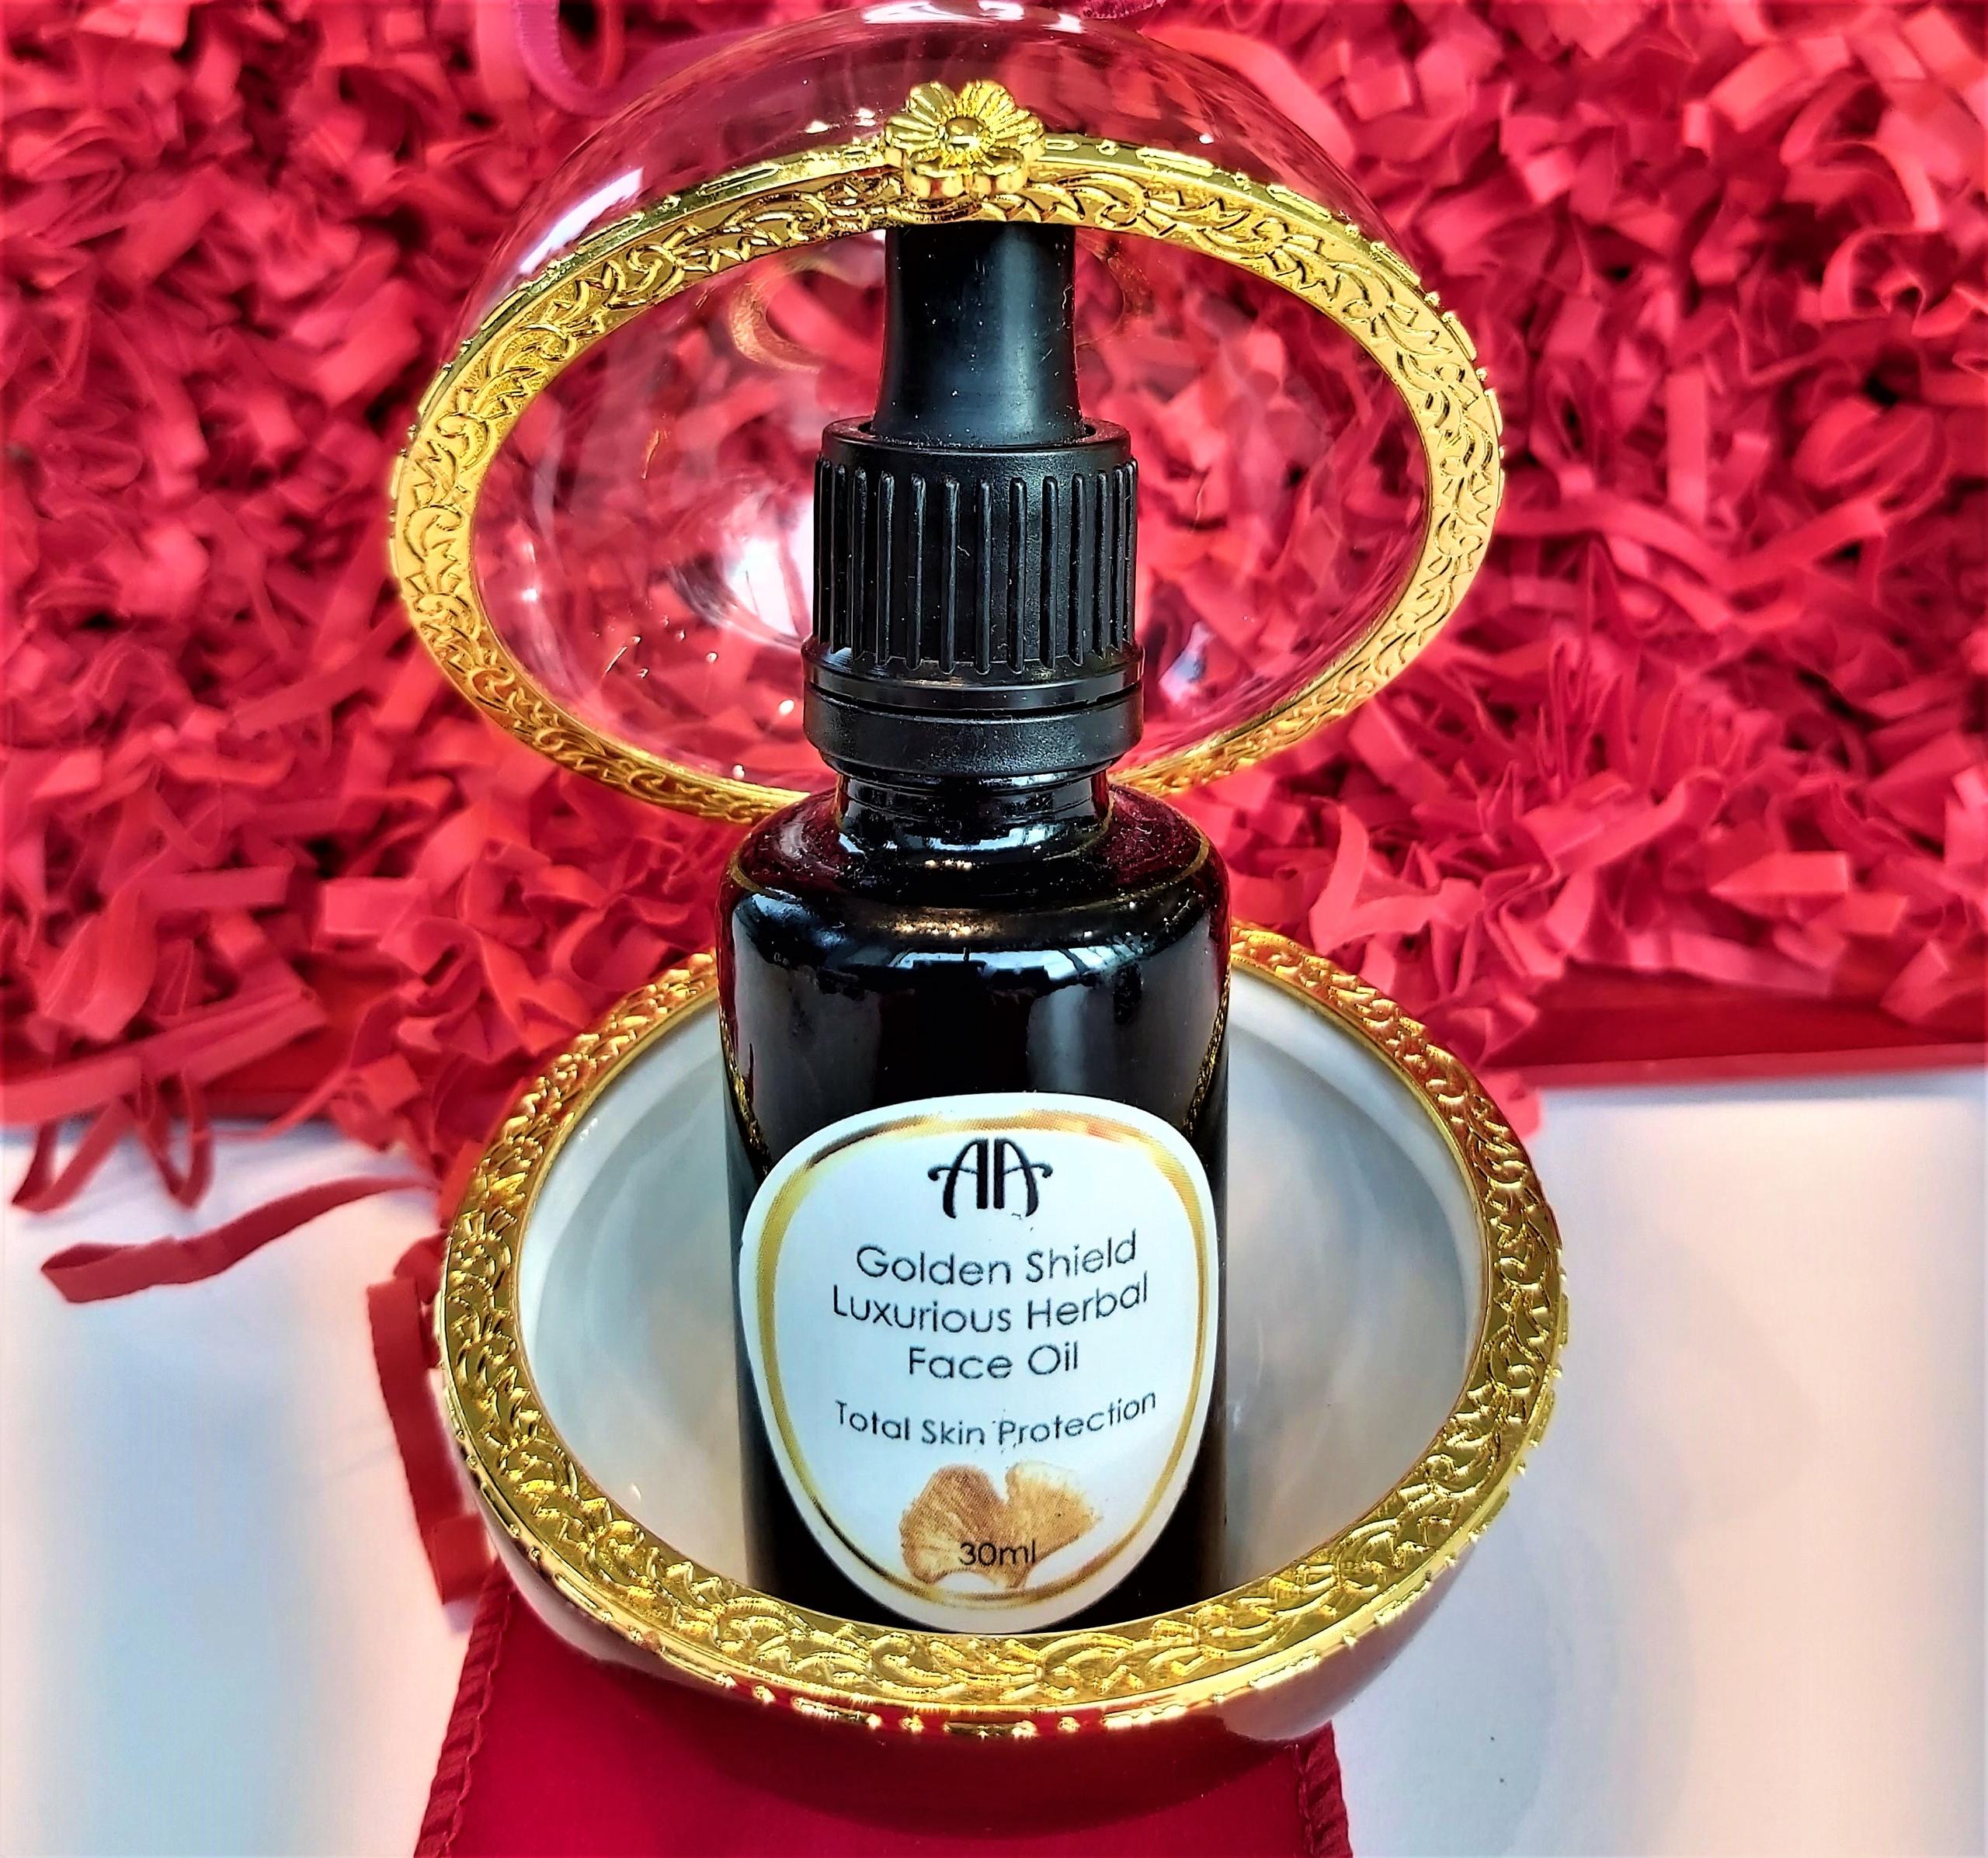 facial oil for stressed skin, face oil for environmental damaged skin, 24/7 skin protection